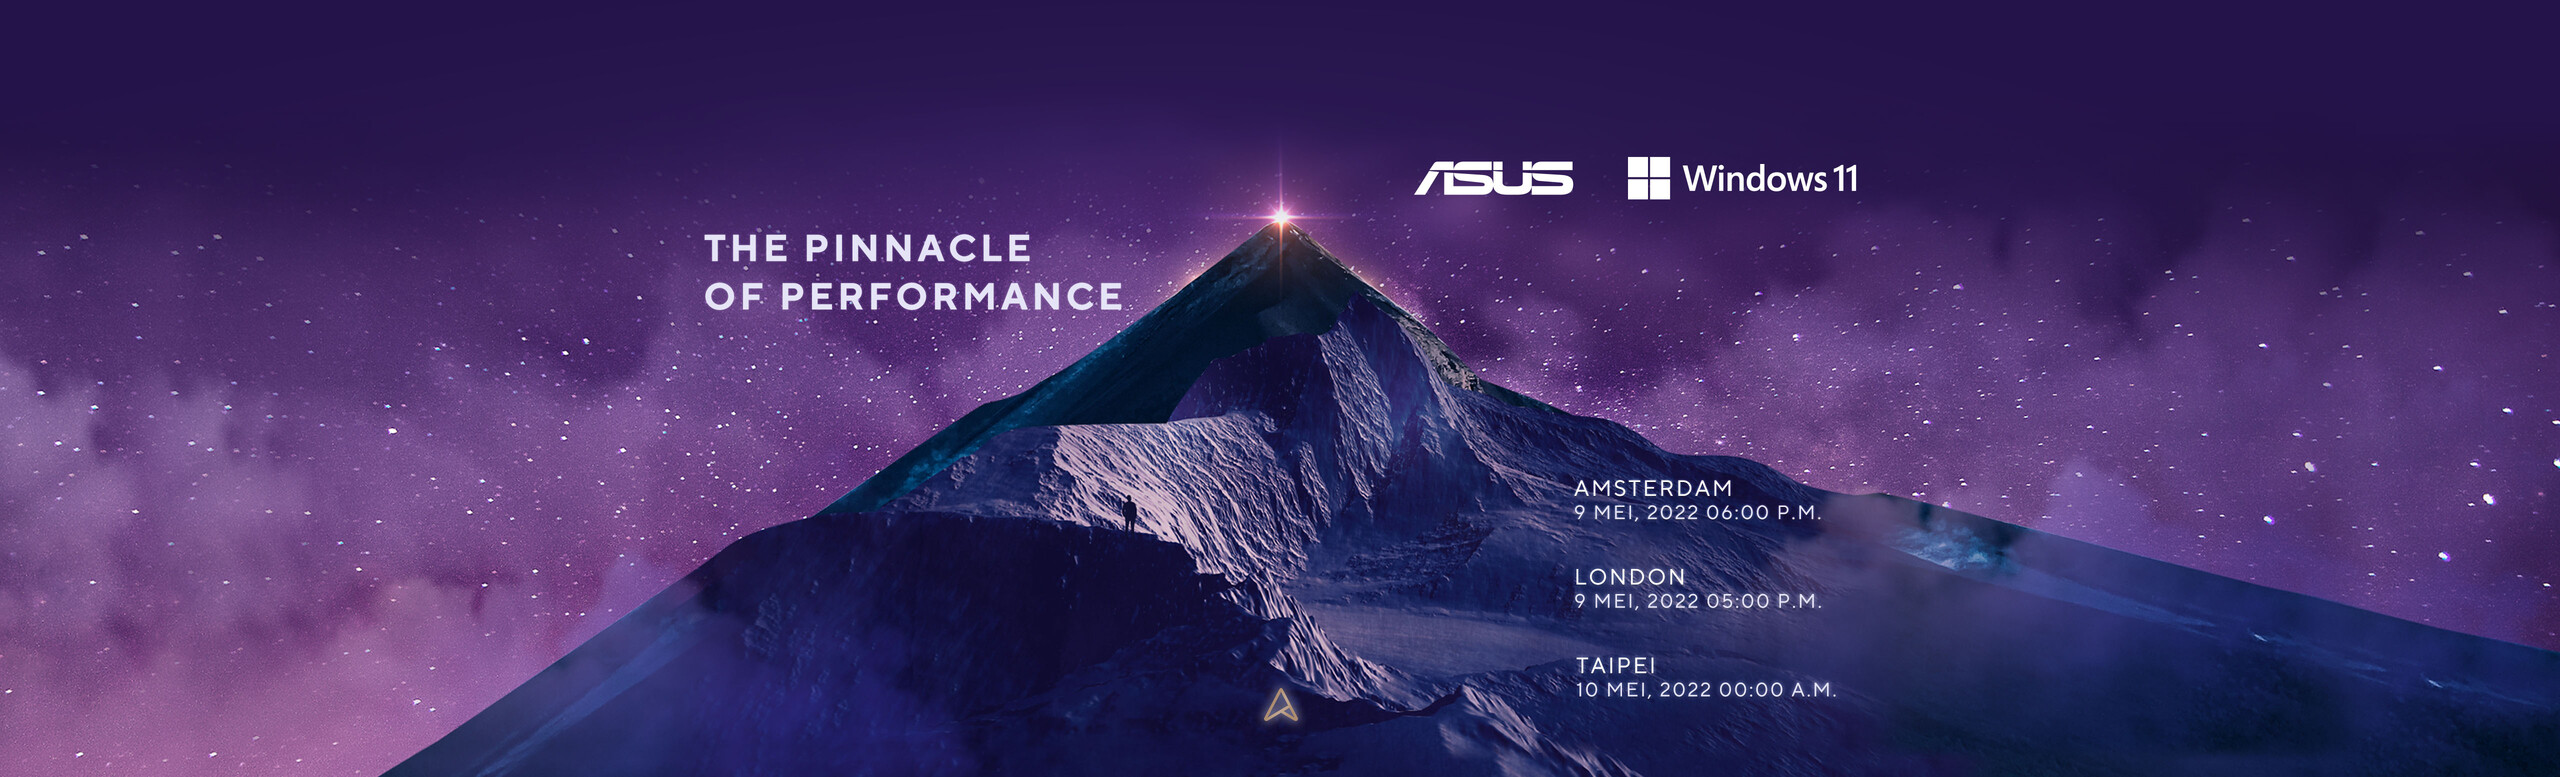 asus-events